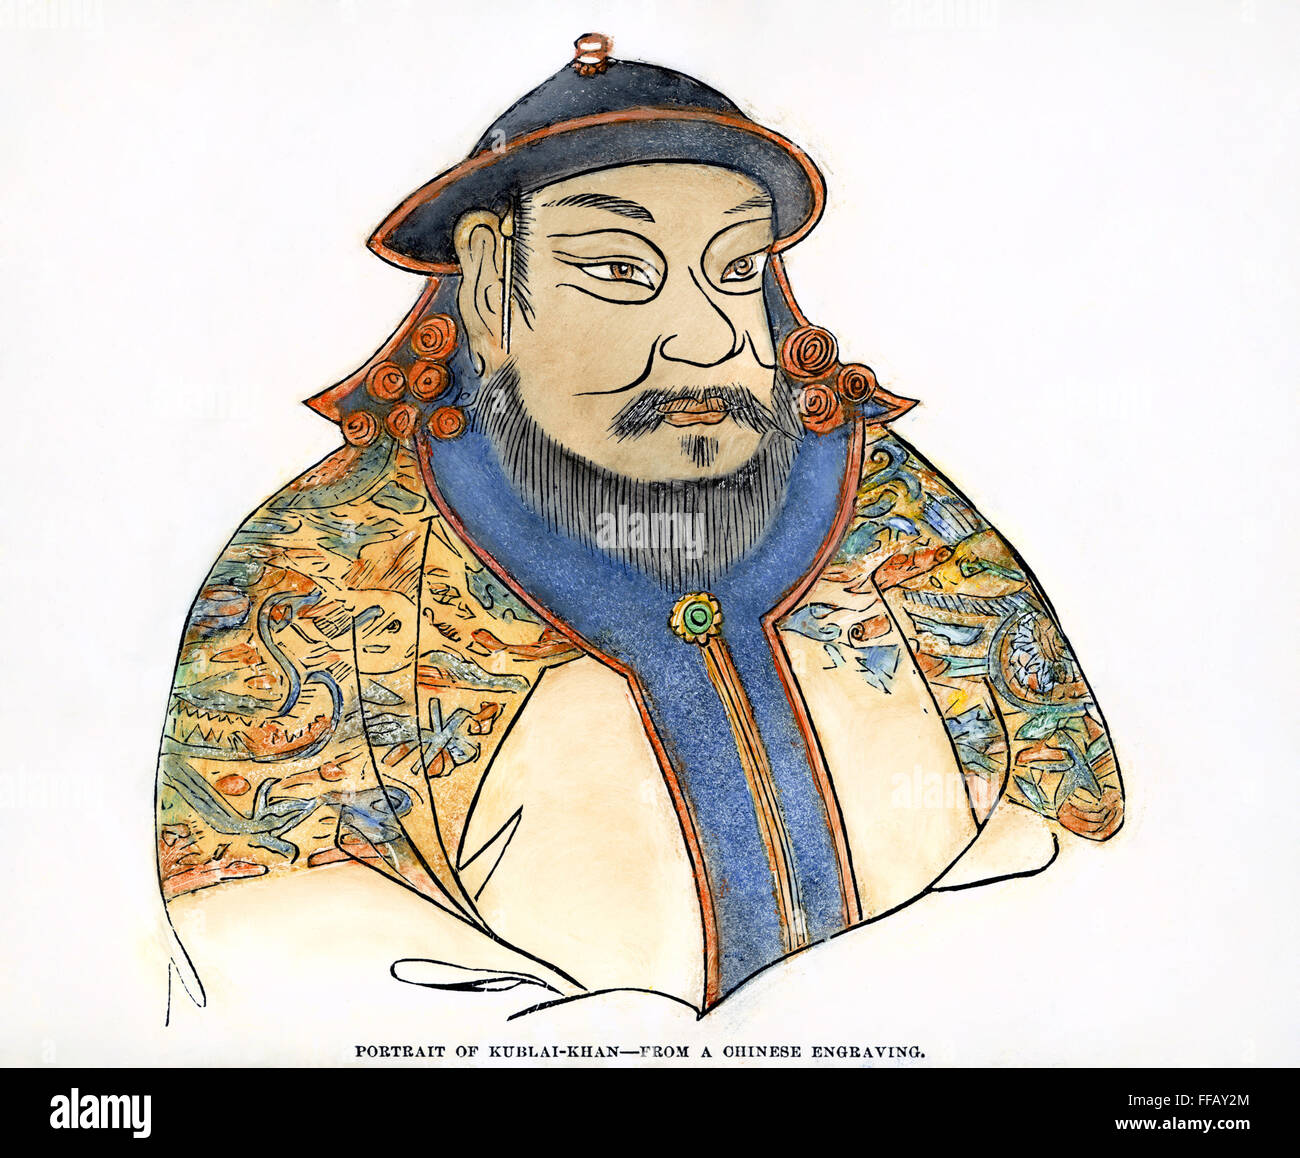 KUBLAI KHAN (1216-1294). /nMongol khan and founder of Mongol dynasty in China. After an antique Chinese engraving. Stock Photo